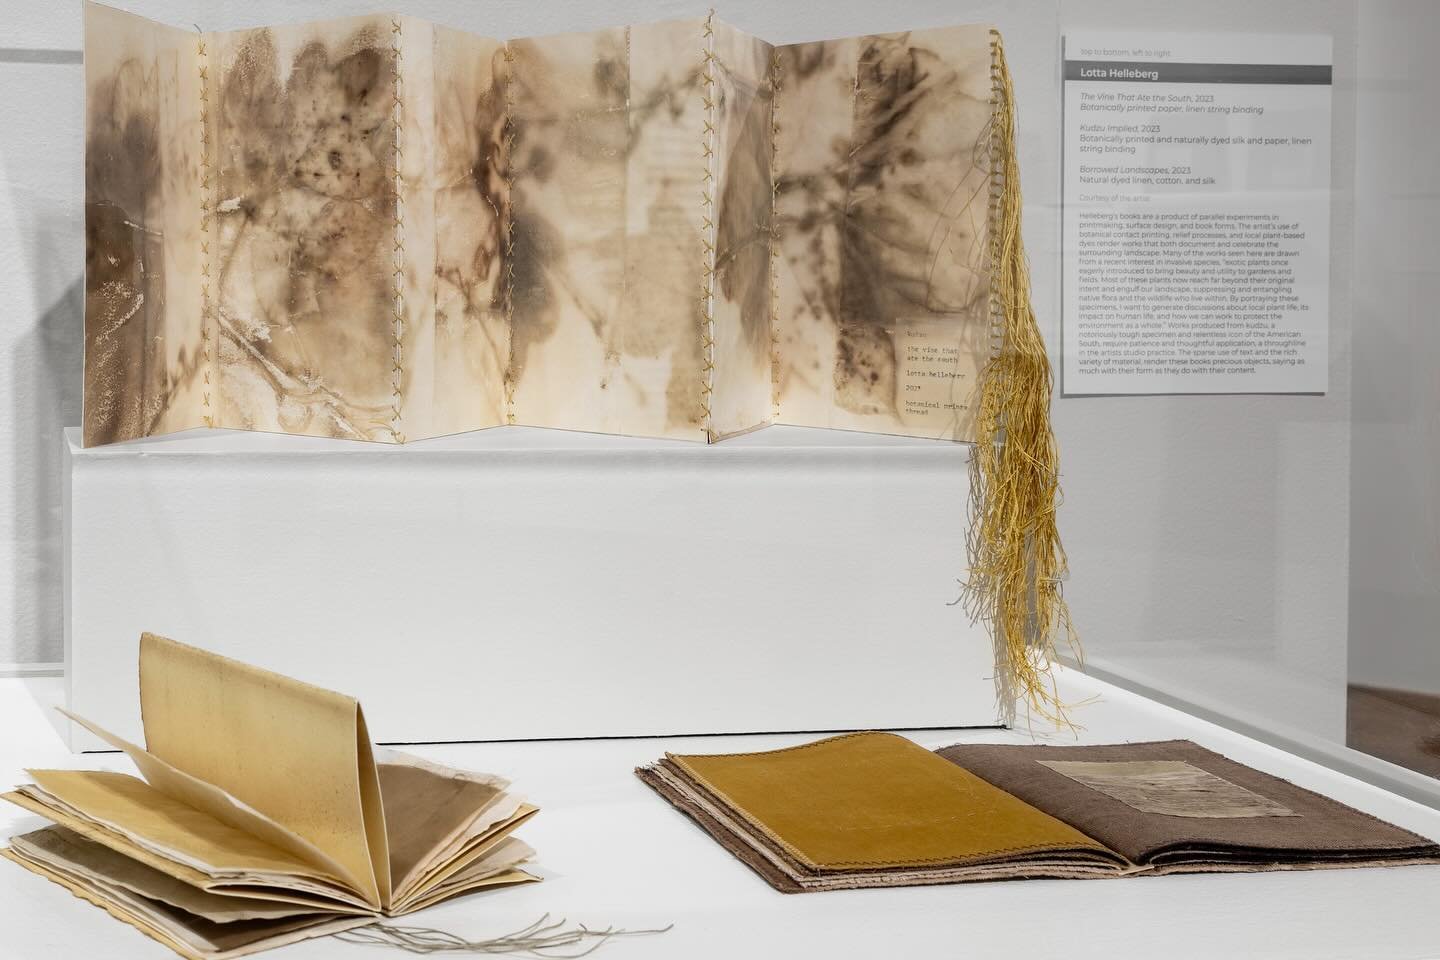 Just a few more weeks to view the exhibit &ldquo;Pulp &amp; Bind: Paper &amp; Books in Southern Appalachia at @brmuseum in Blowing Rock, NC. If you find yourself in the North Carolina mountains I highly recommend. #showantell #bookartsexhibition.
📷 